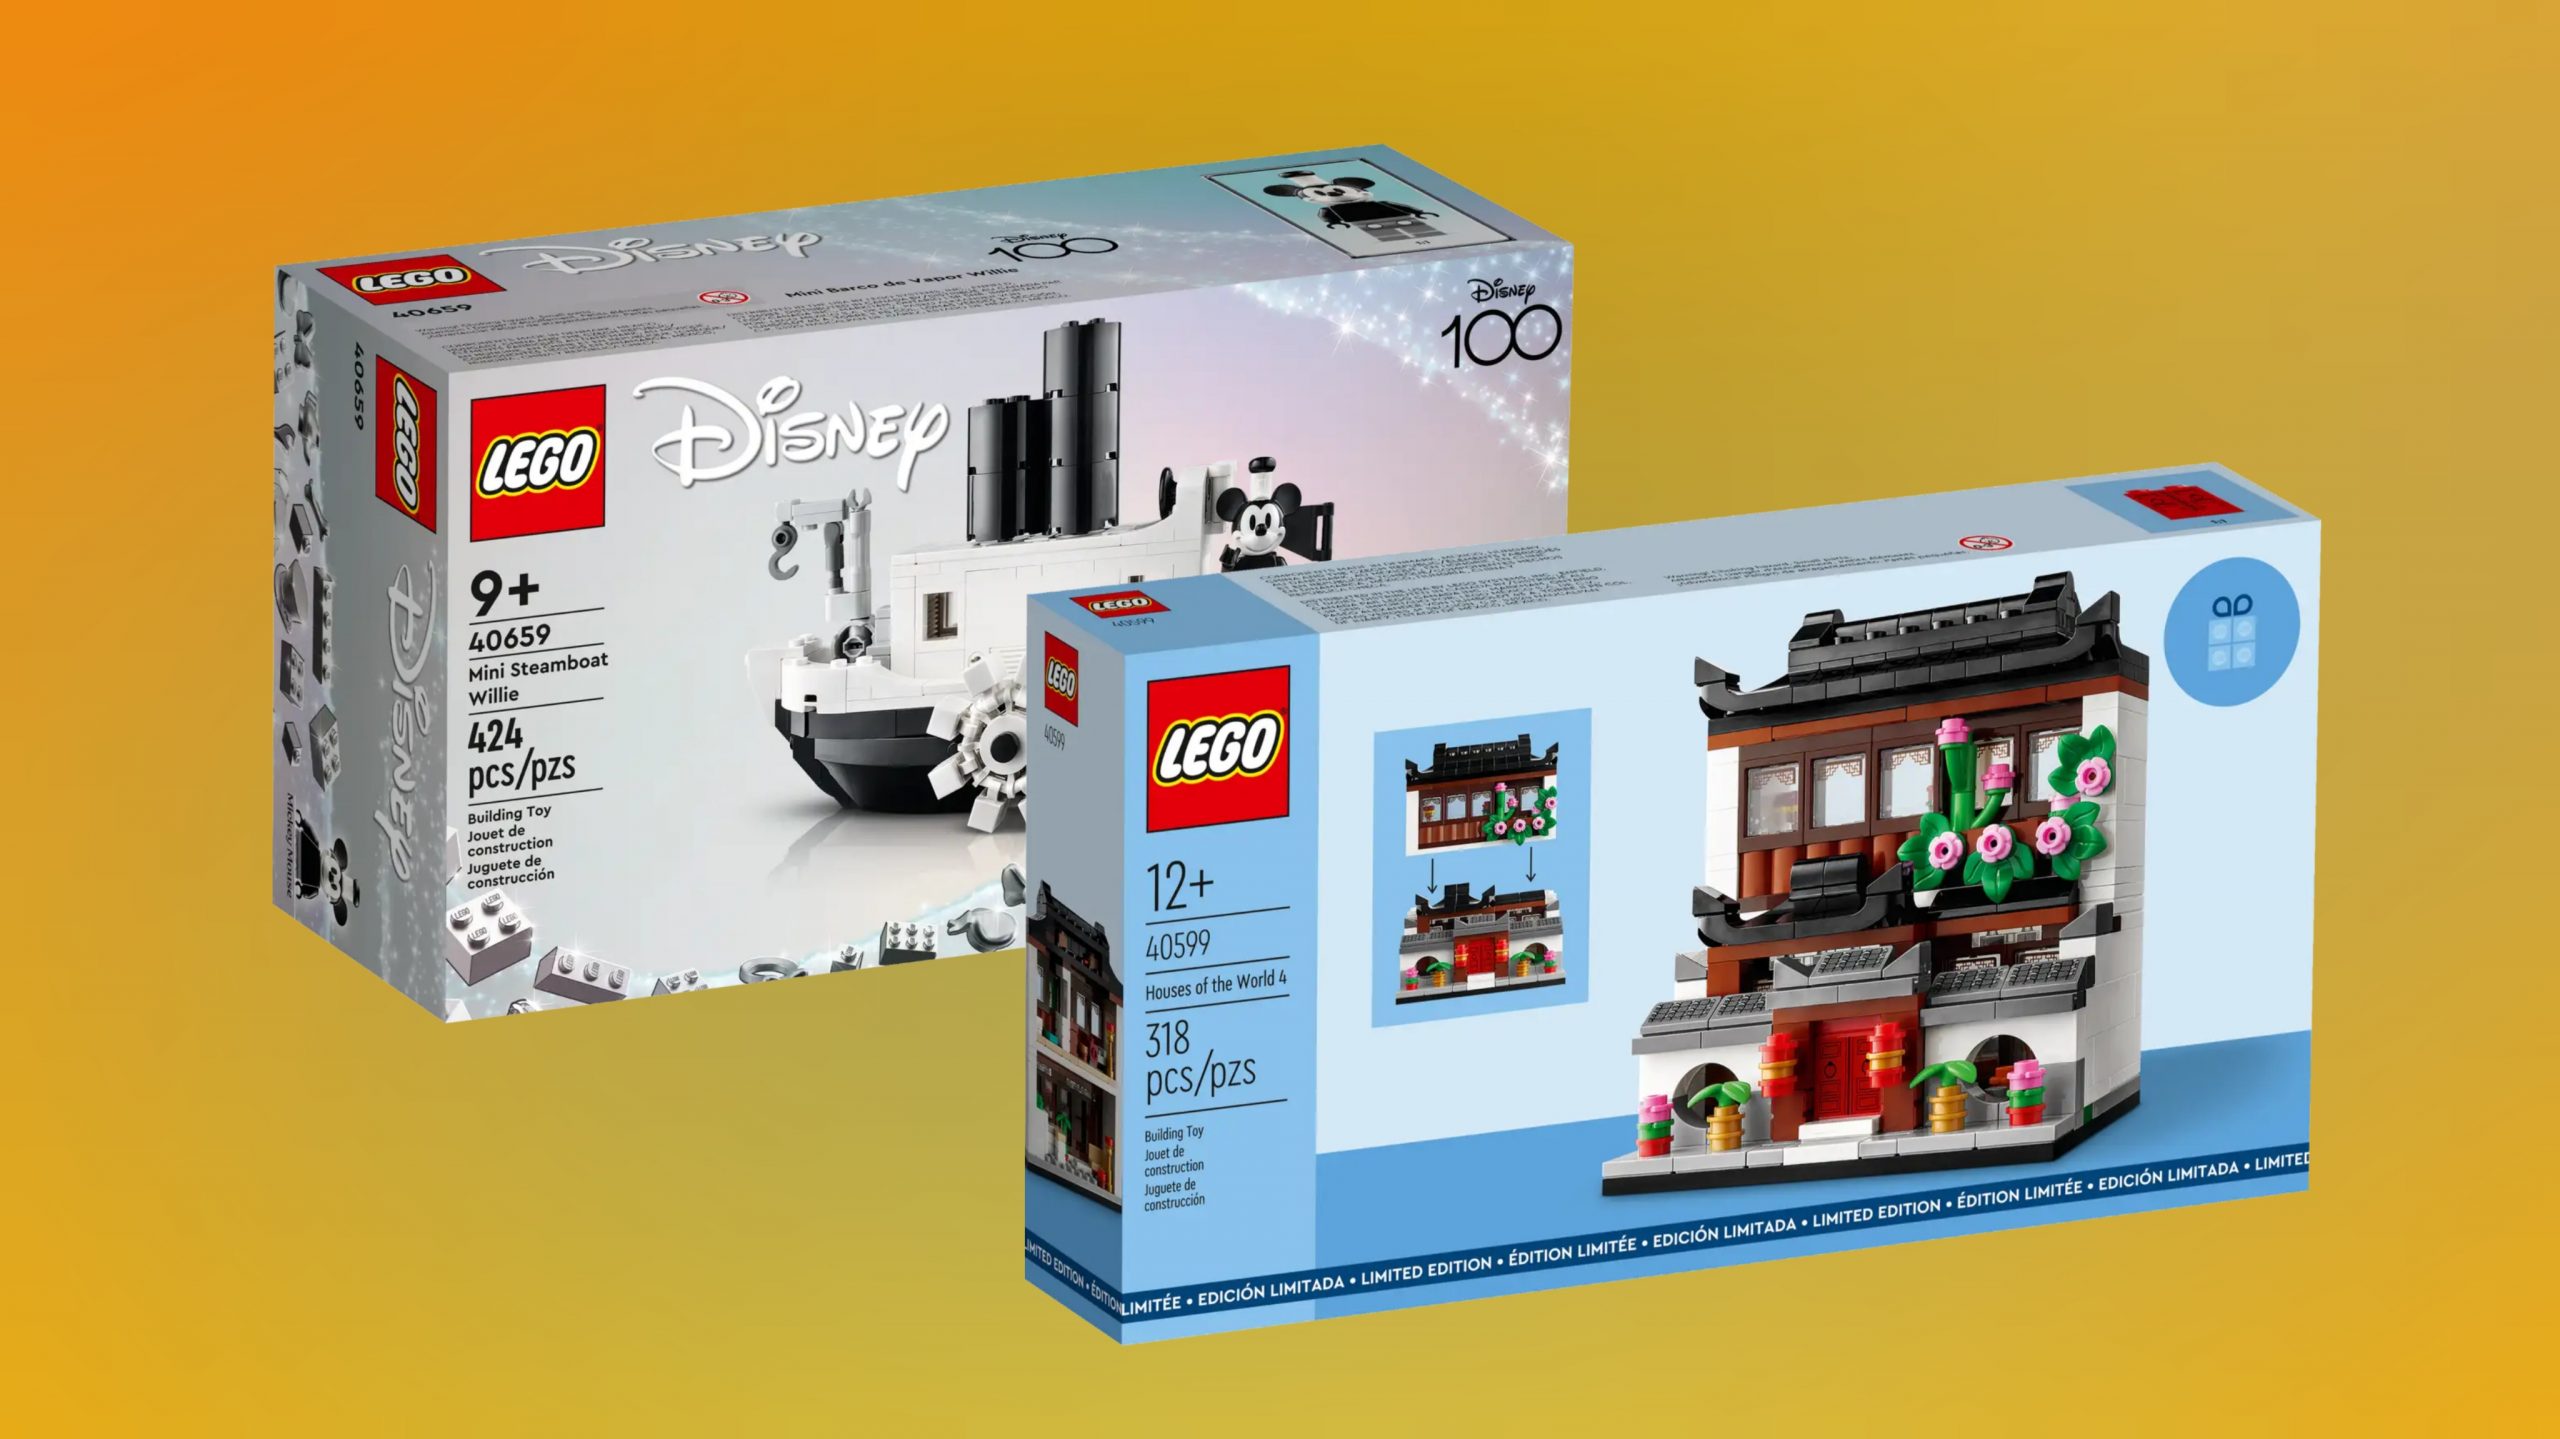 LEGO Disney 100 Mini Steamboat Willie (40659) and Houses of the